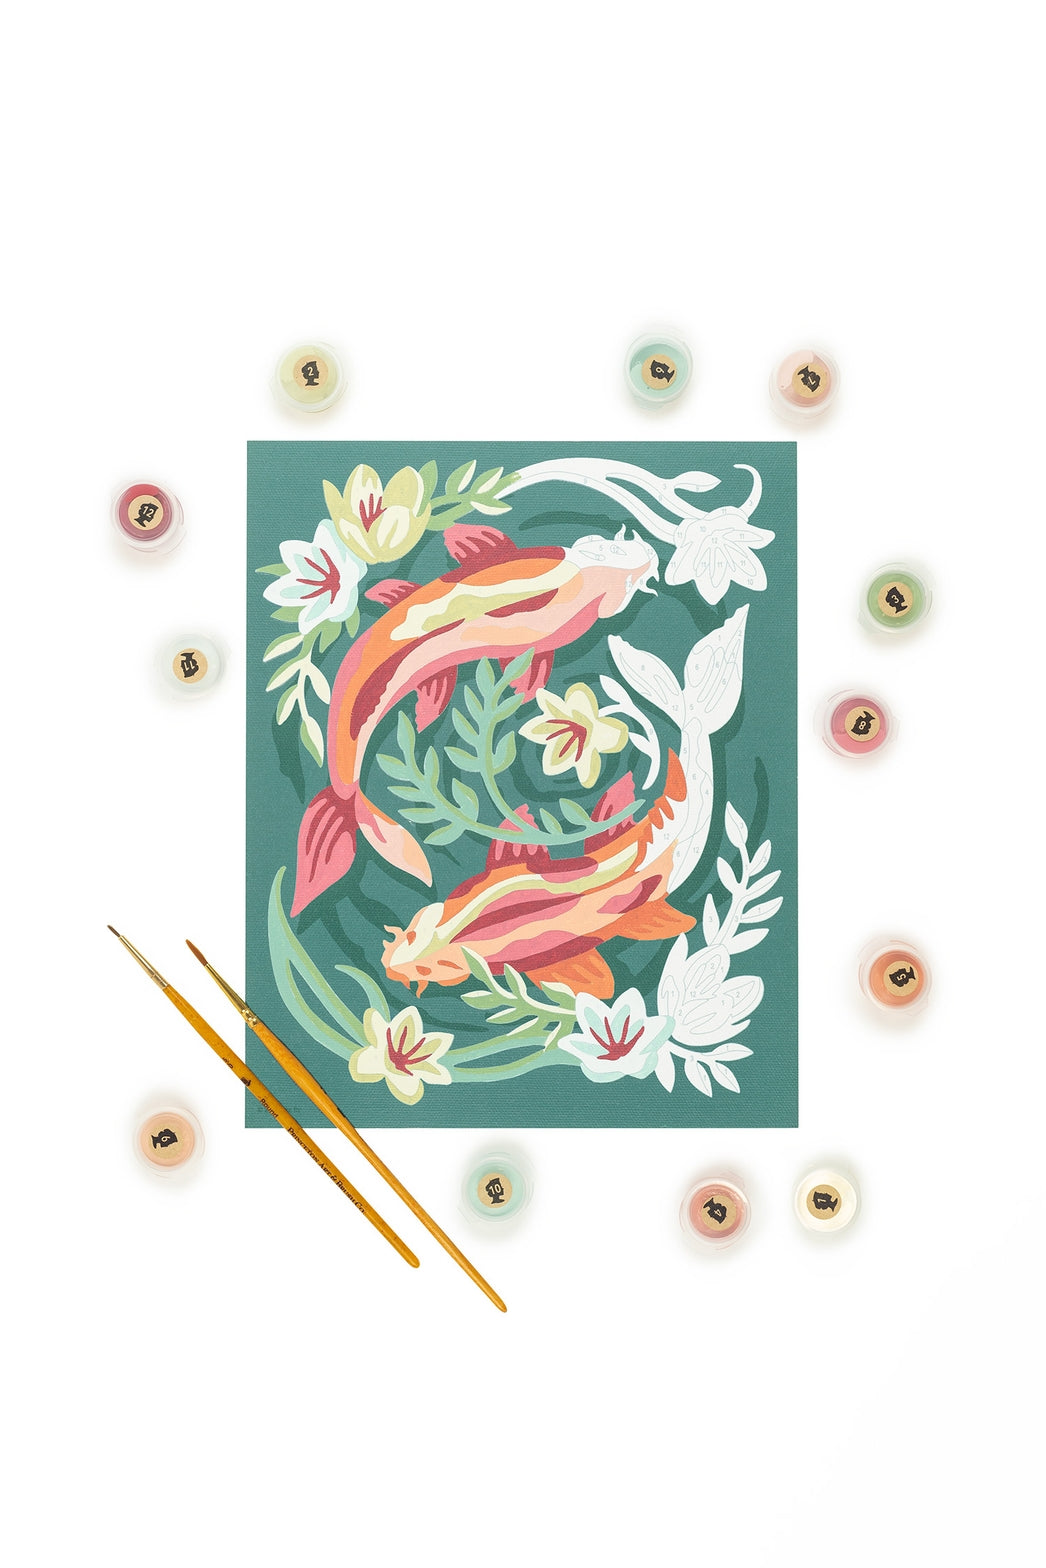 Koi Fish in Pond Paint-By-Number Kit